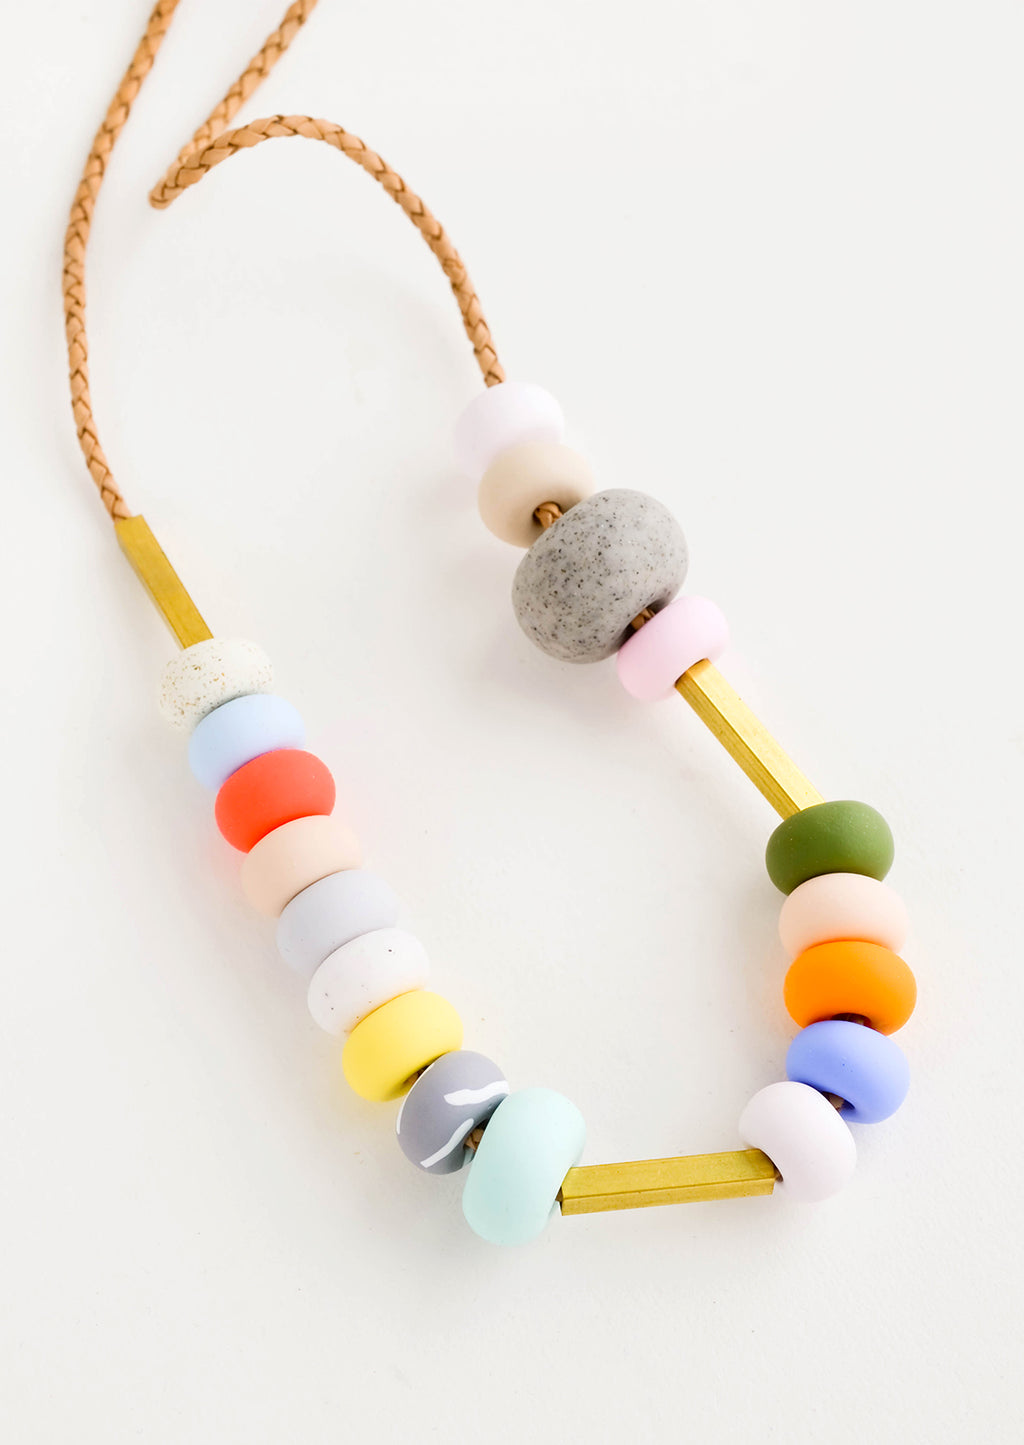 2: Round clay beads in a mix of colors, textures and sizes strung on leather cord